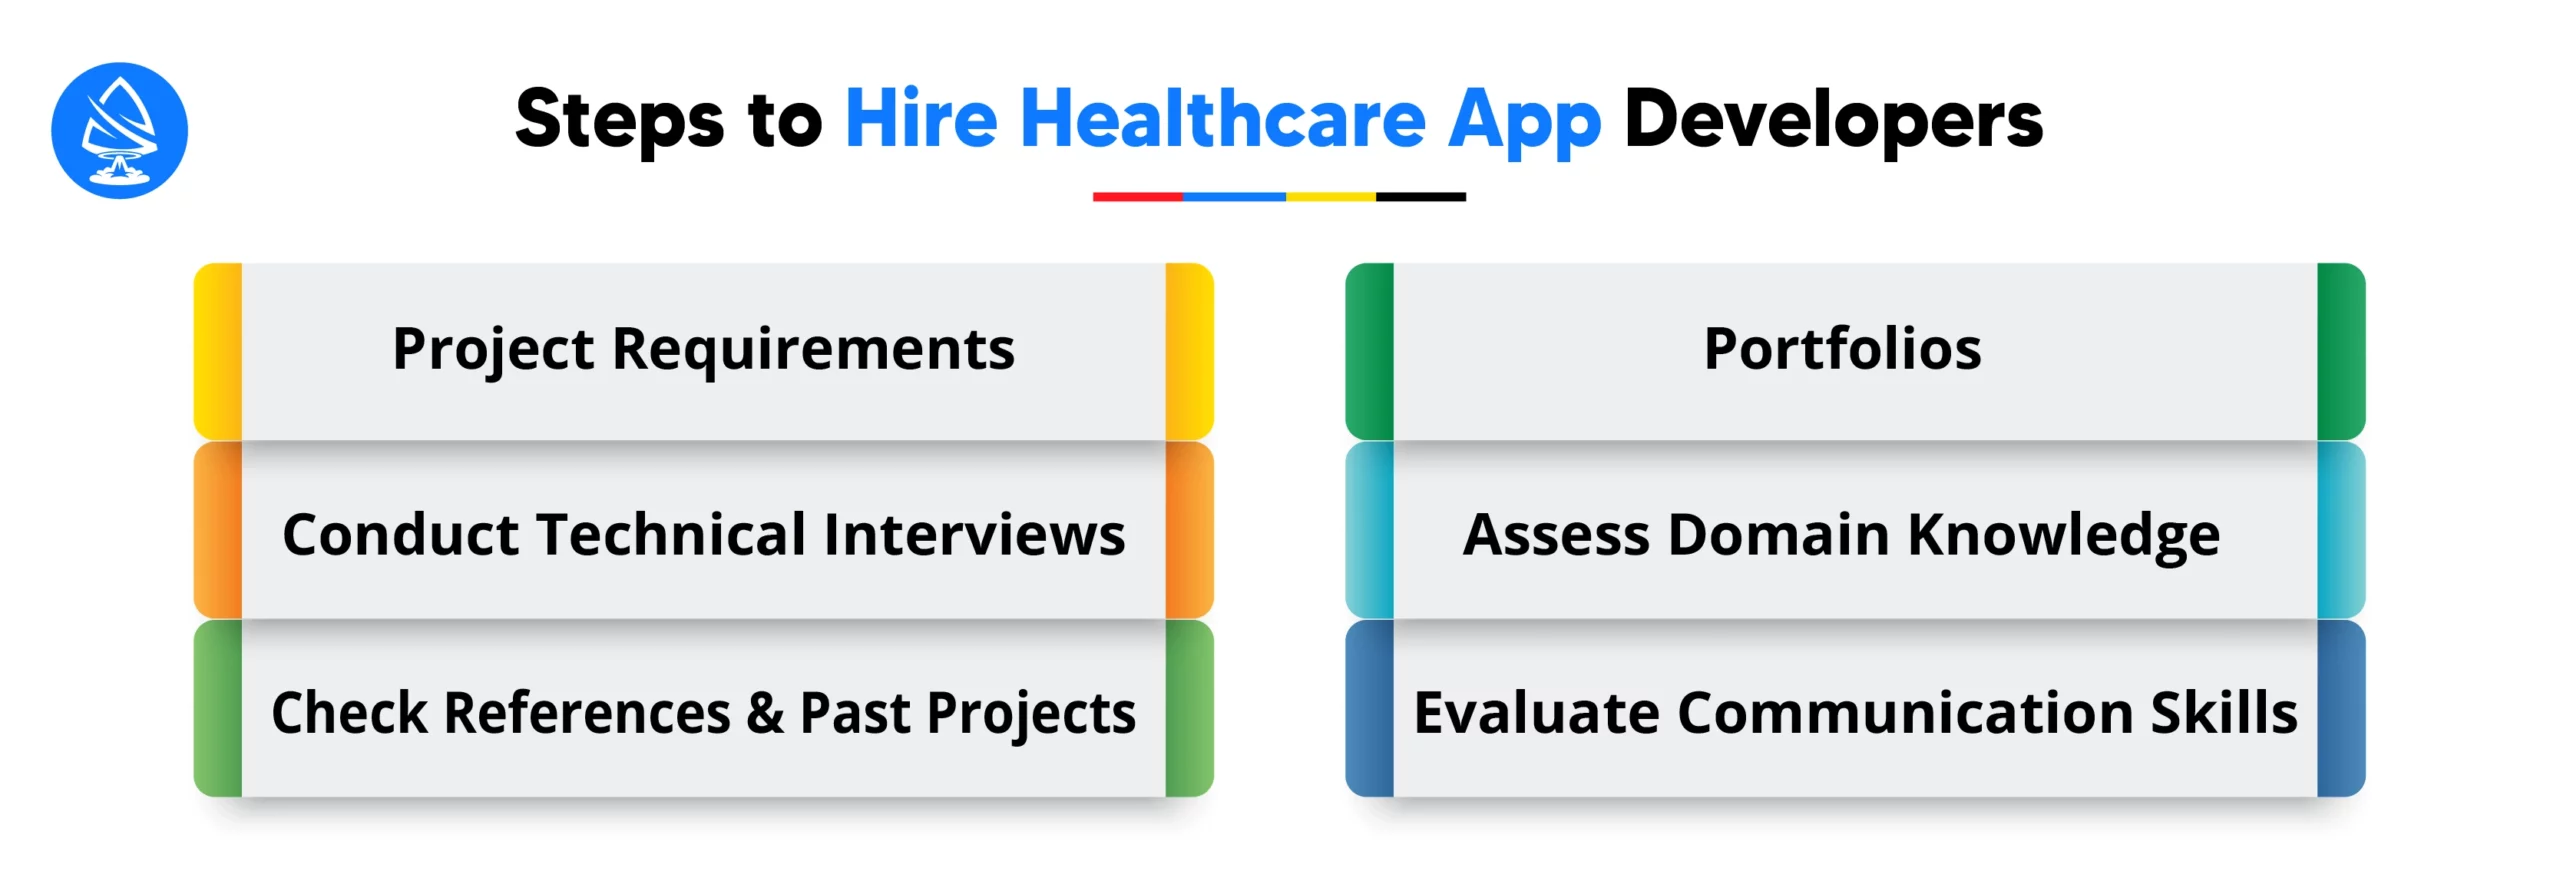 Steps to Hire Healthcare App Developers